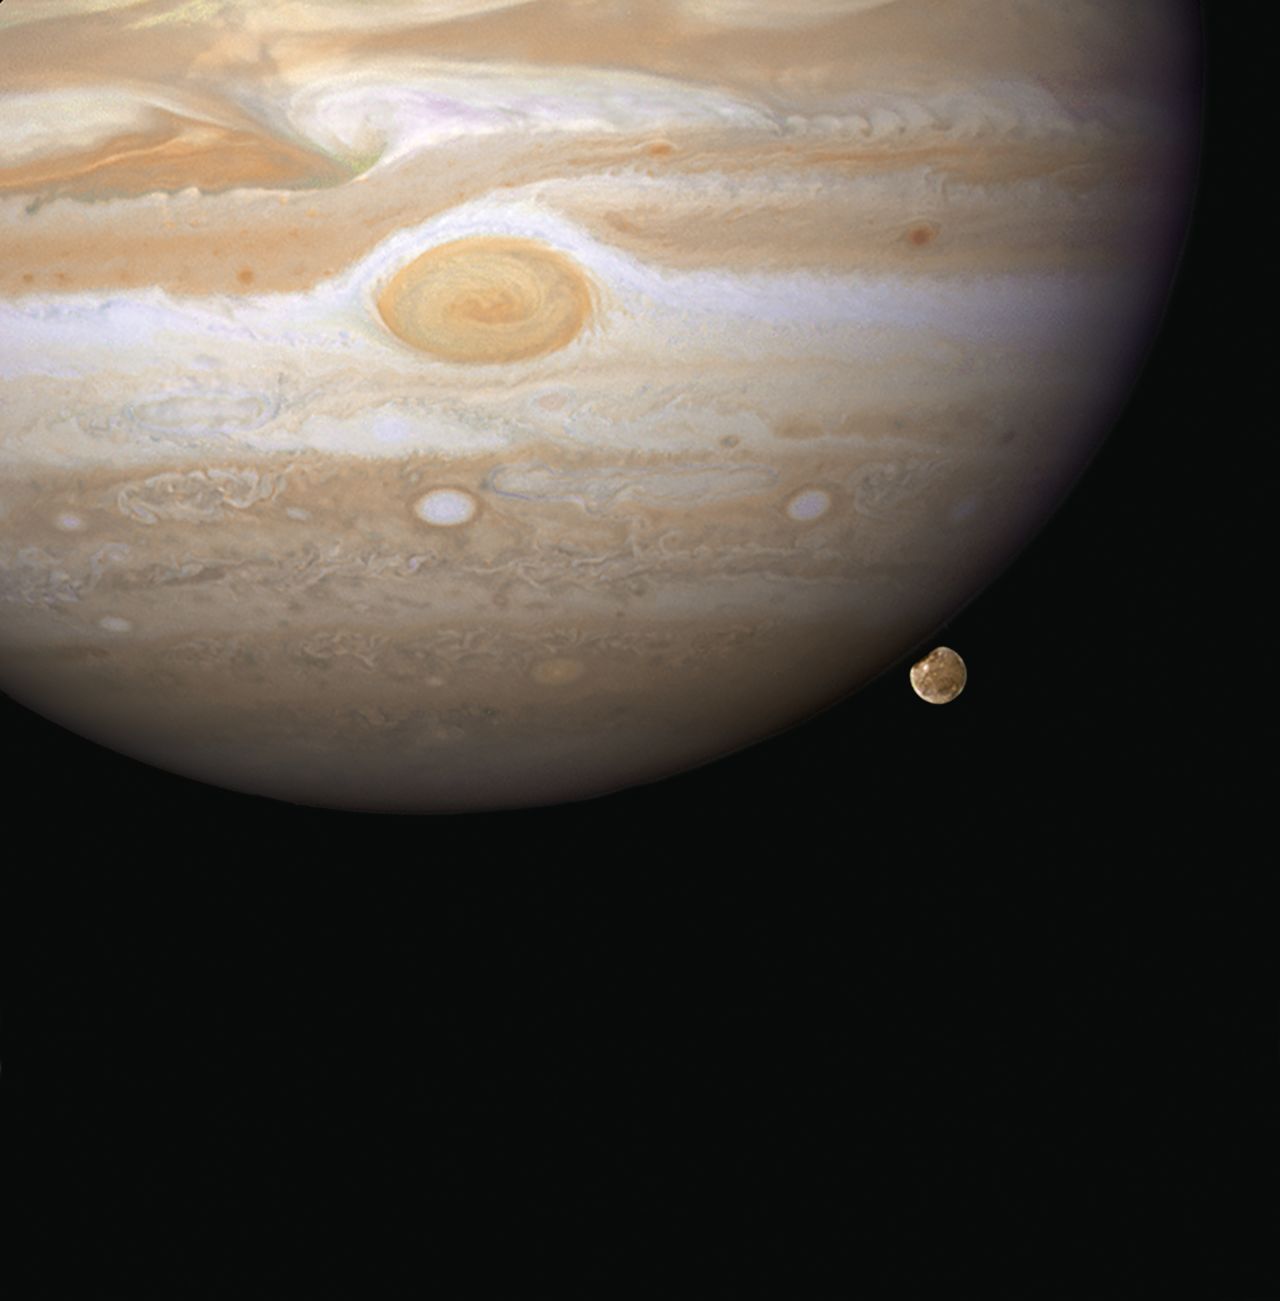 Hubble snapped this image in 2007 of Ganymede appearing to peek out from beneath Jupiter. Ganymede is the largest moon in our solar system, and it's even bigger than Mercury.